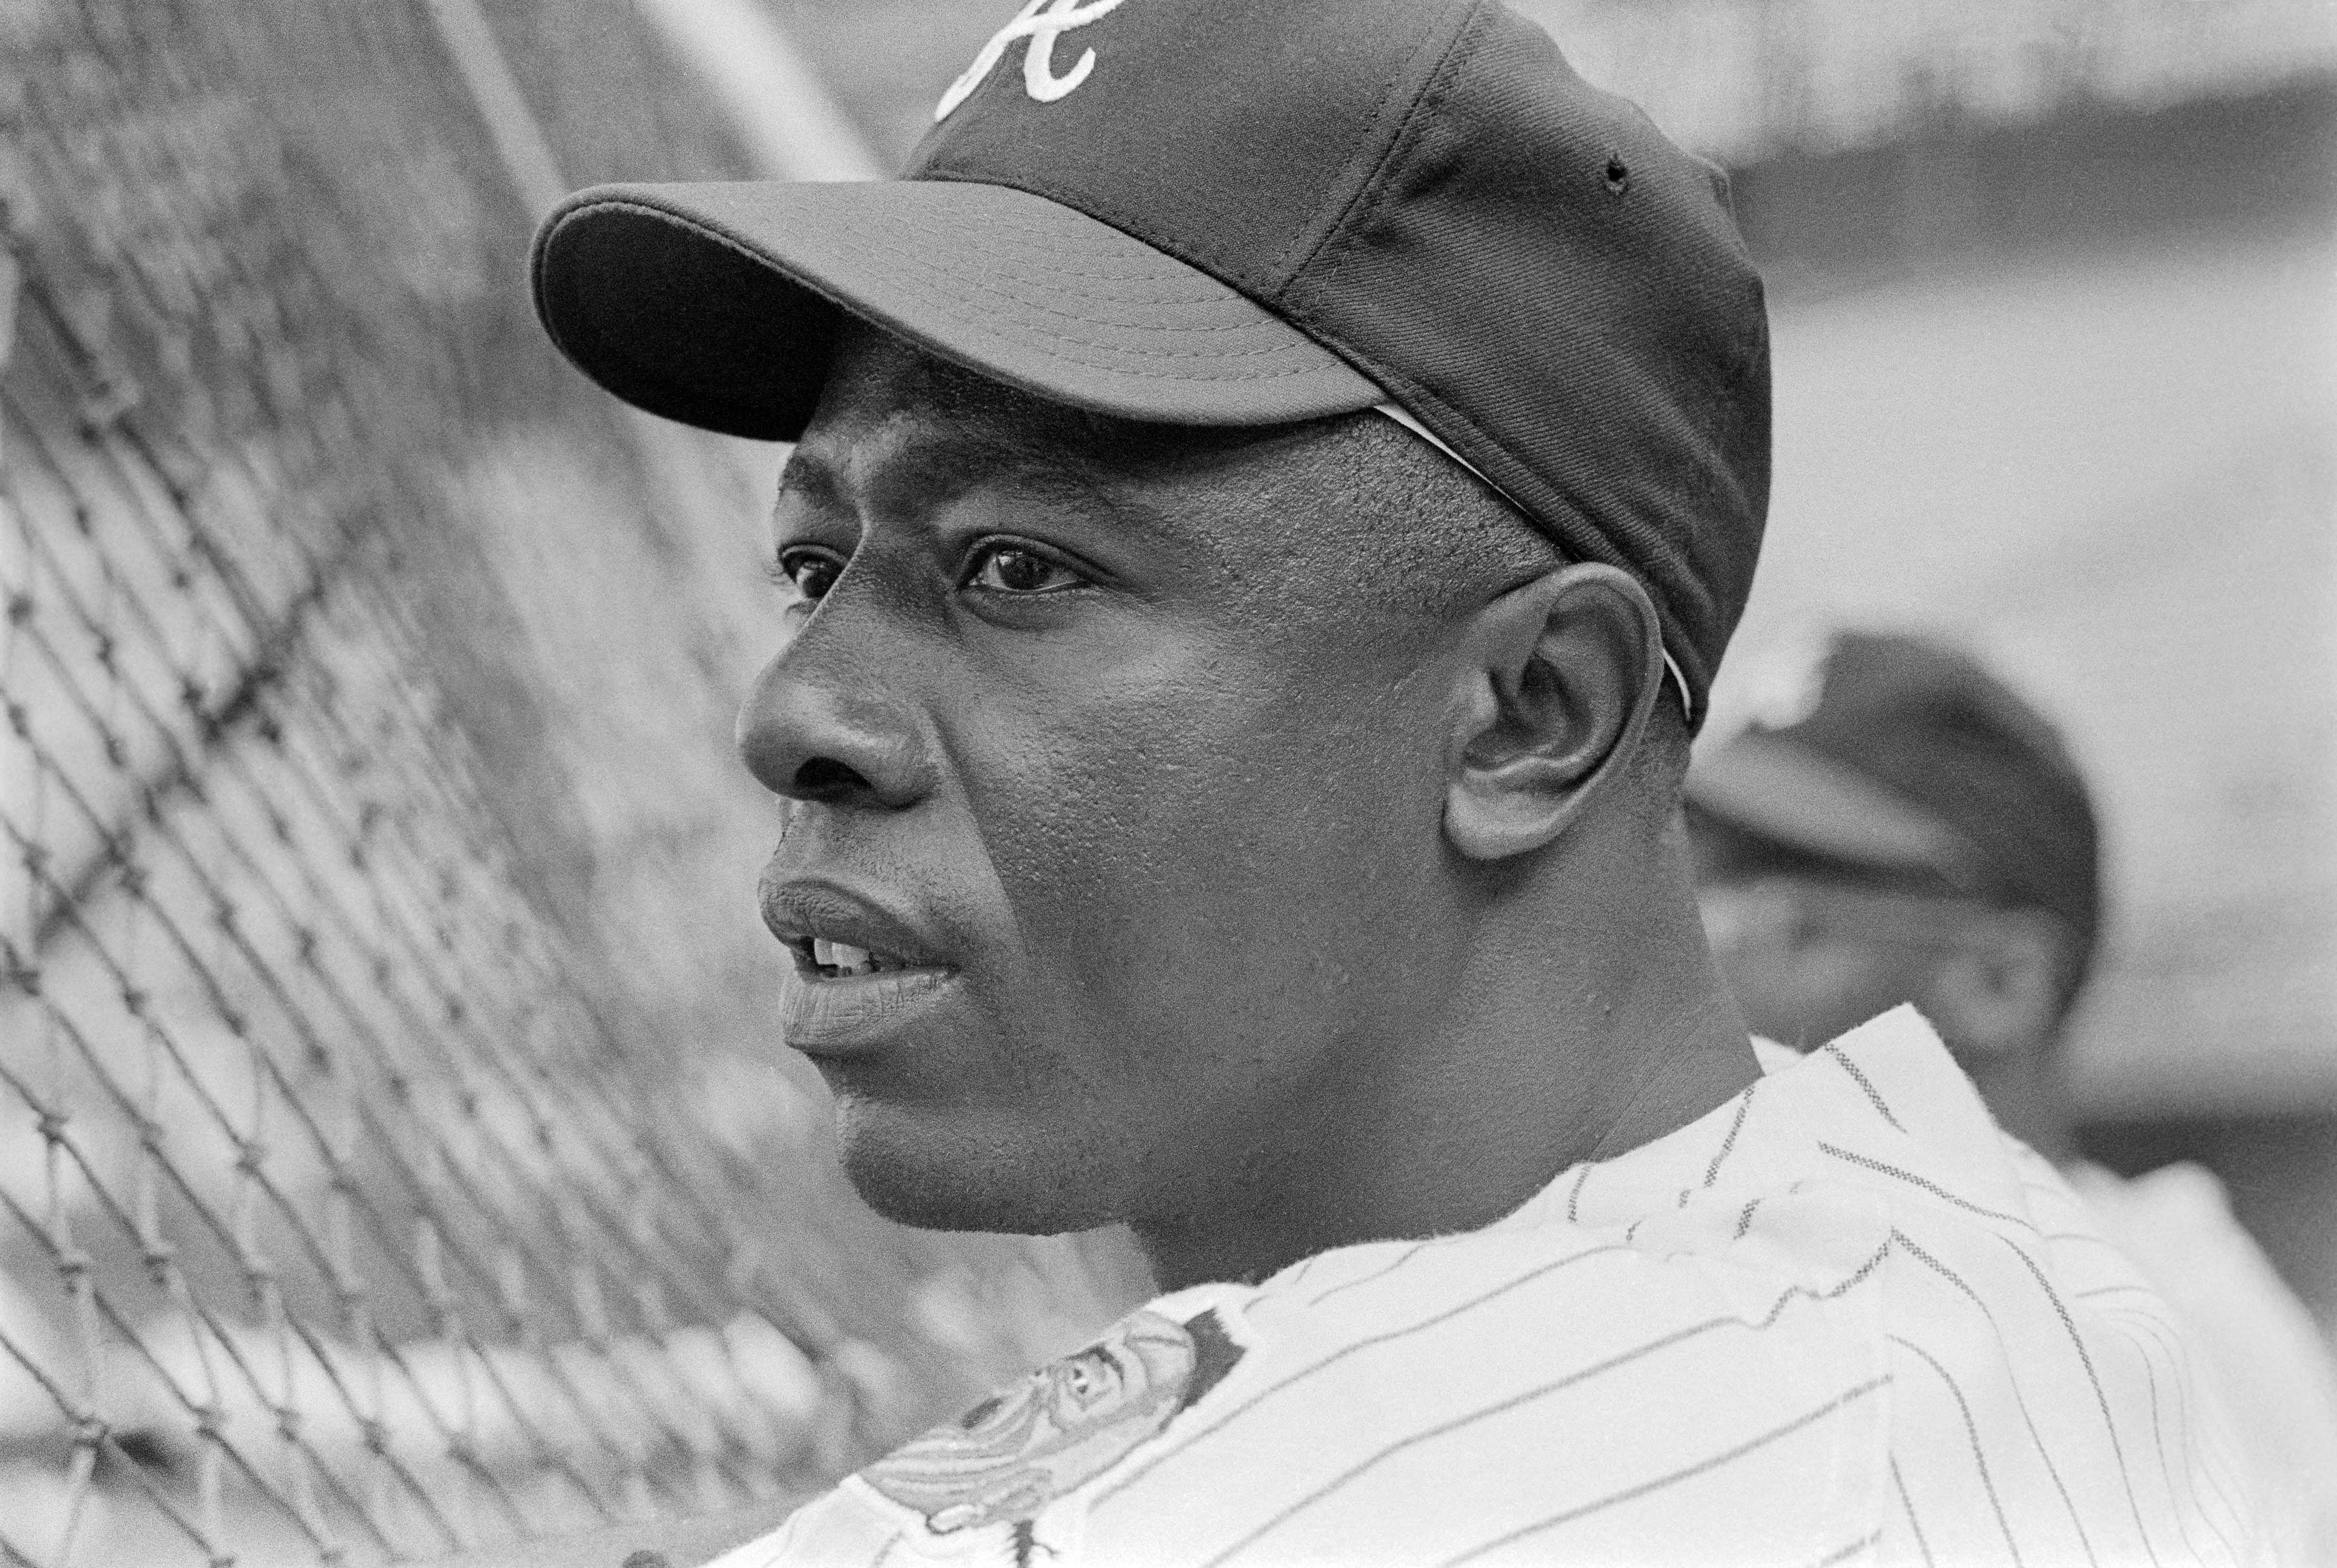 About Hank Aaron